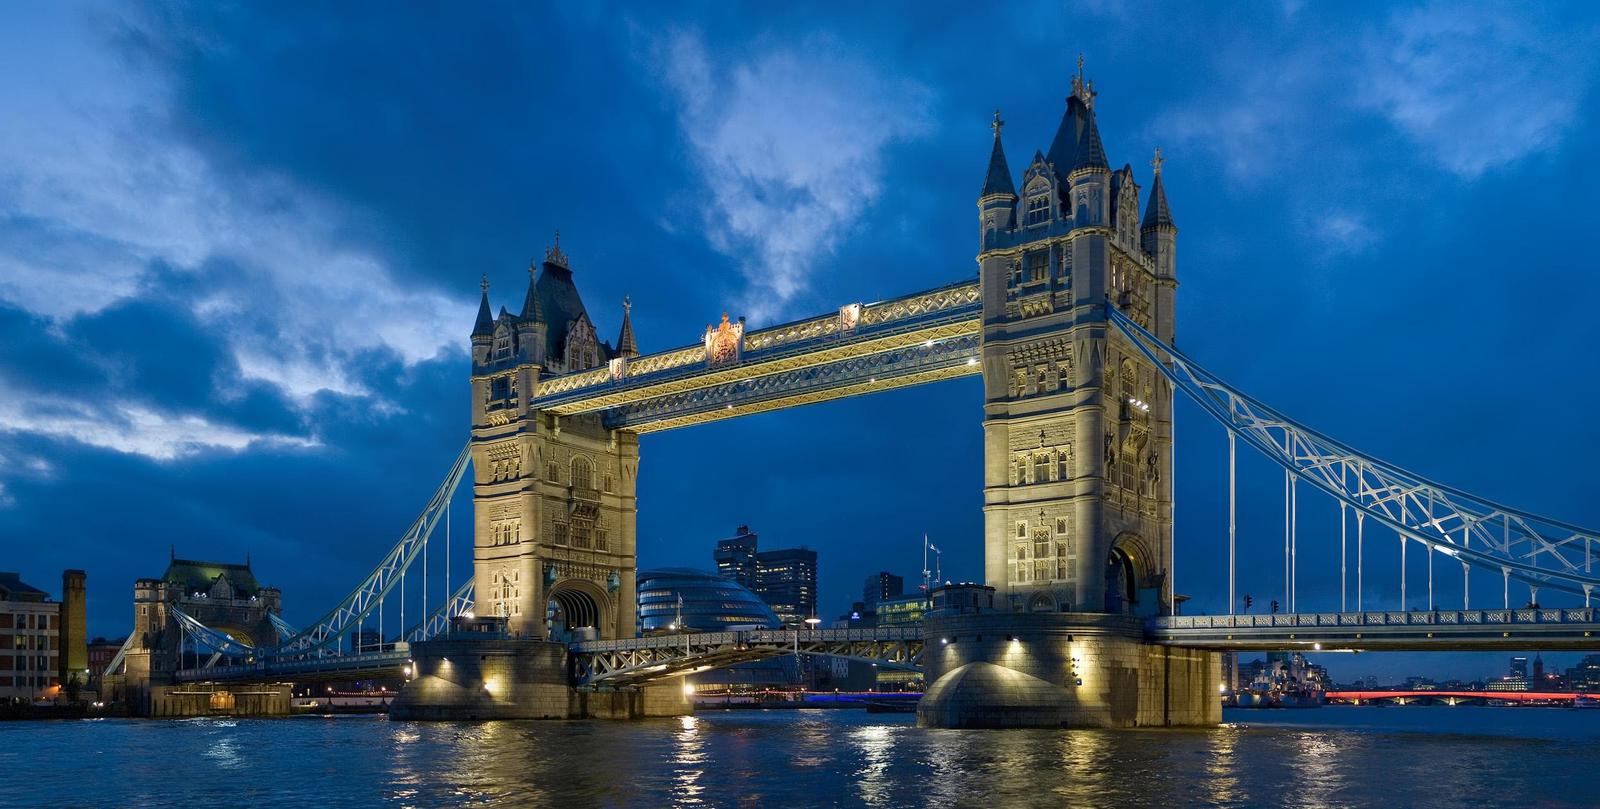 Can You Pass This 40-Question Geography Test That Gets Progressively Harder With Each Question? Tower Bridge